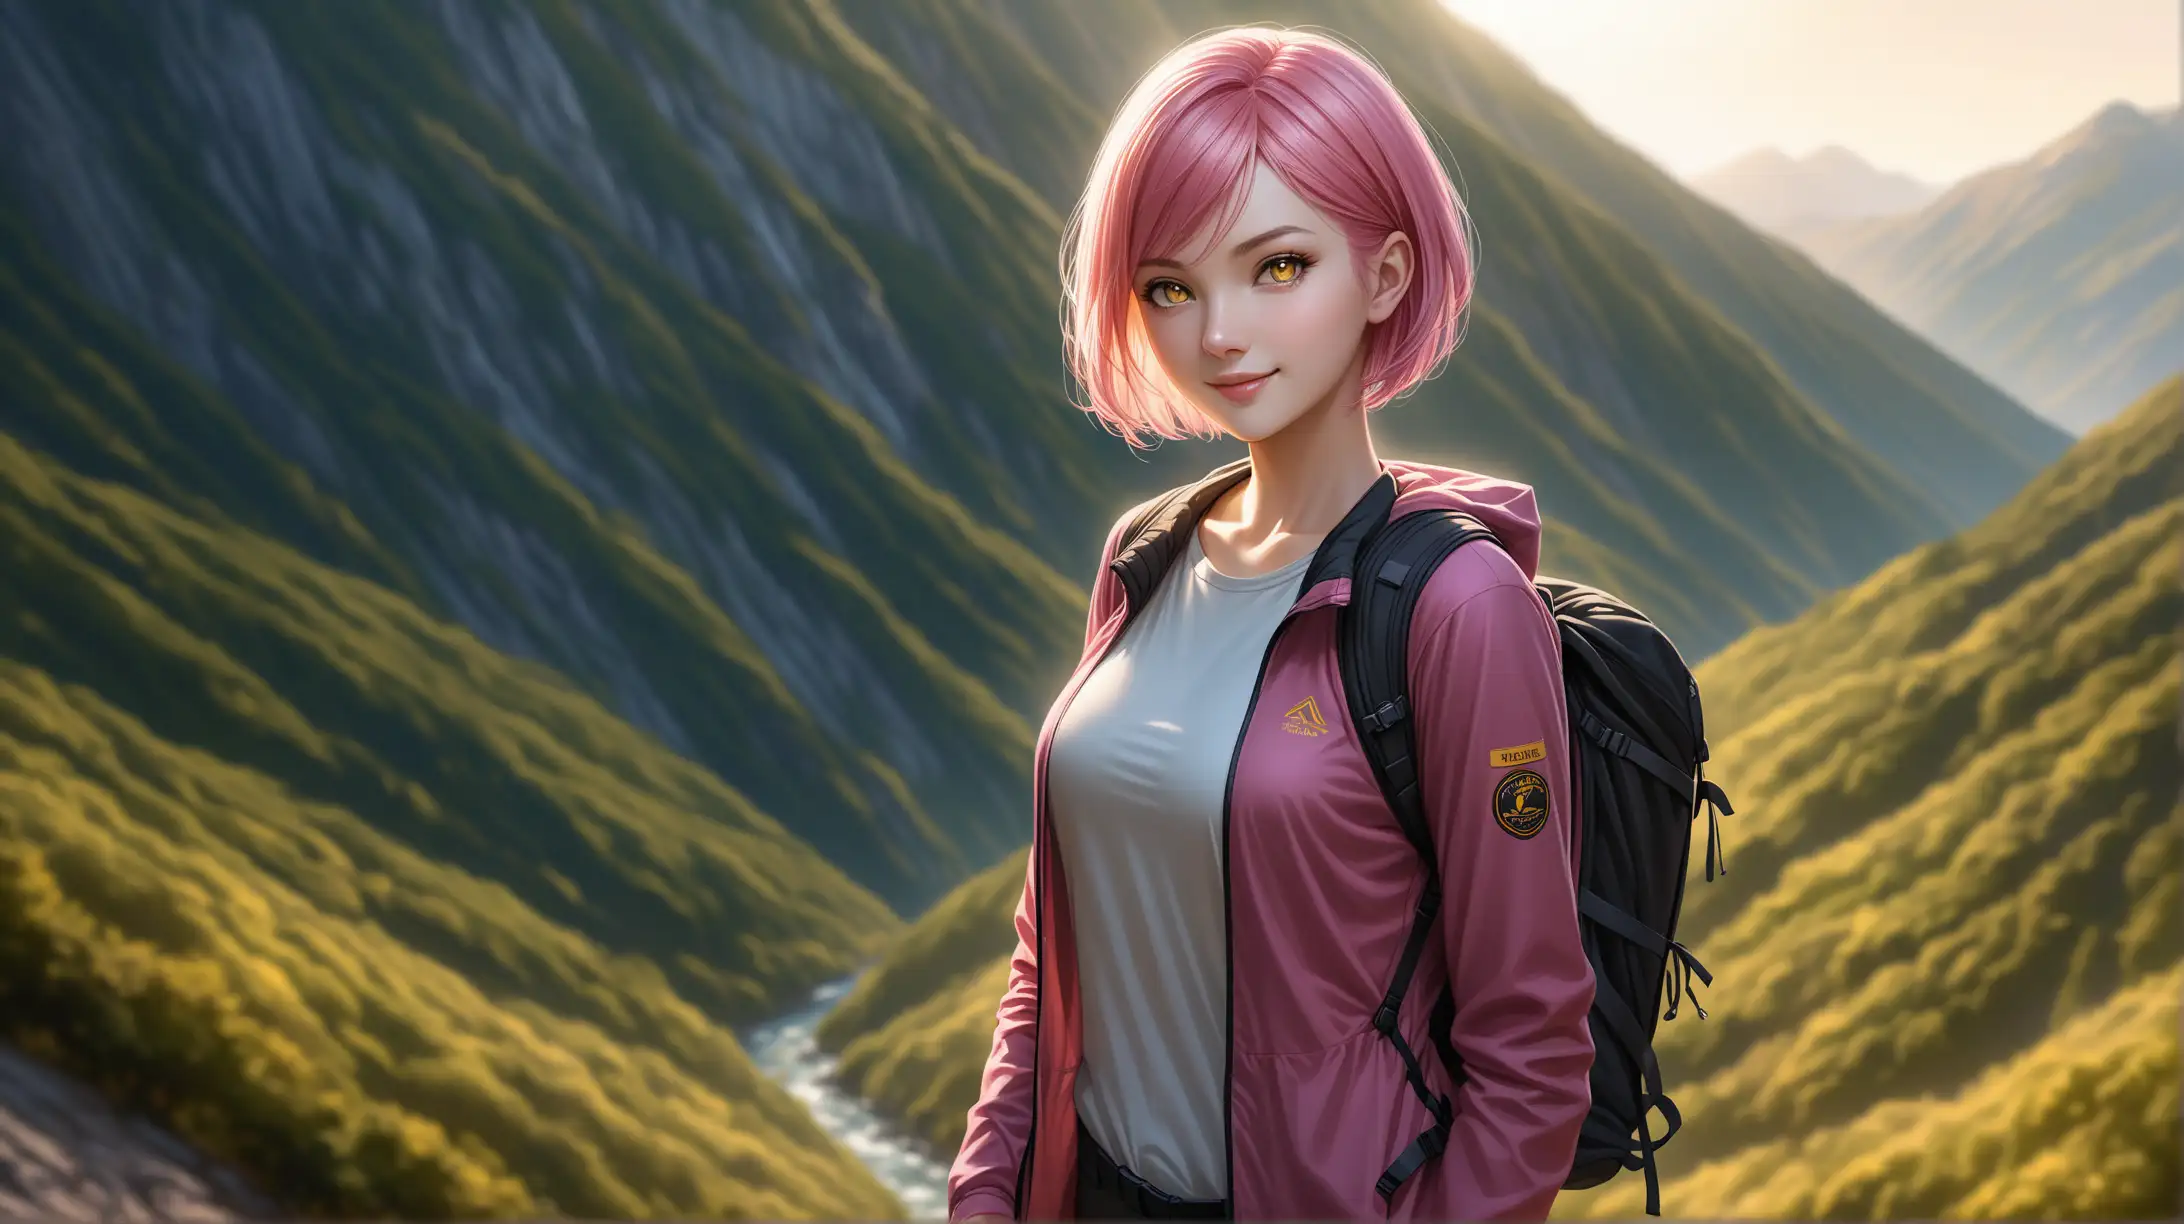 Seductive Woman with Pink Hair Hiking in Dim Lighting